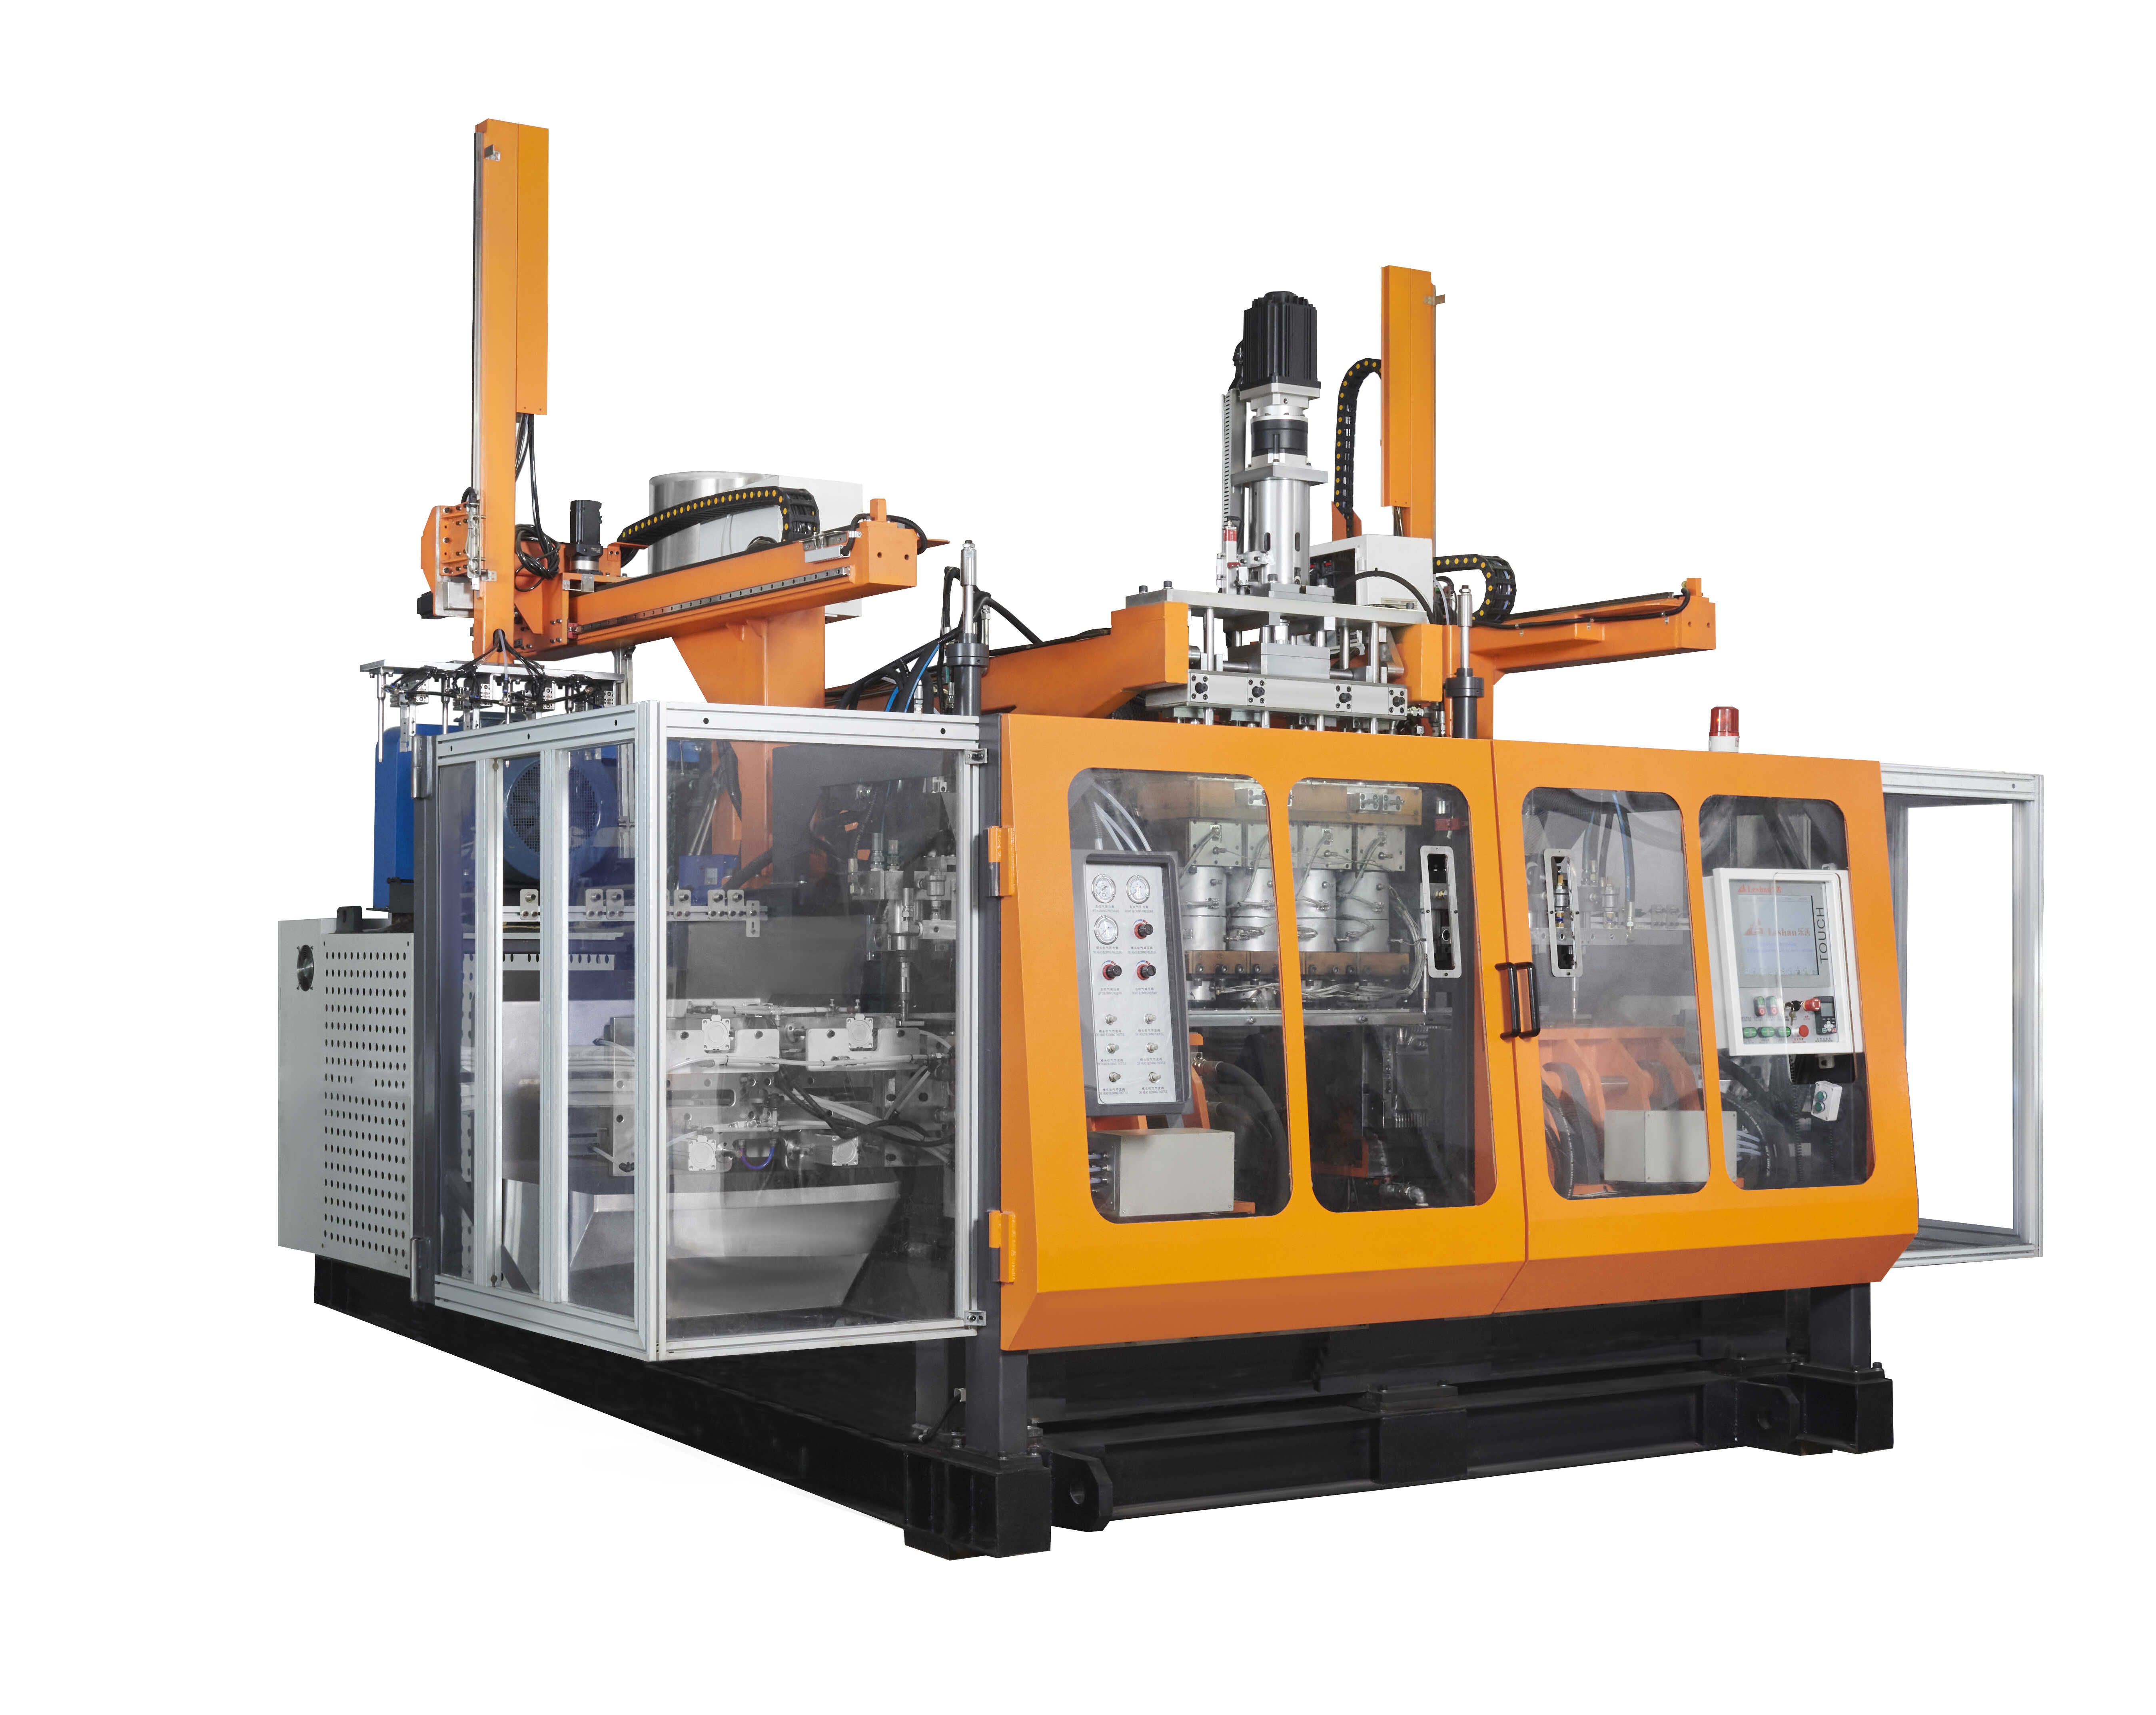 What products are typically manufactured using extrusion blow molding machine 2l?